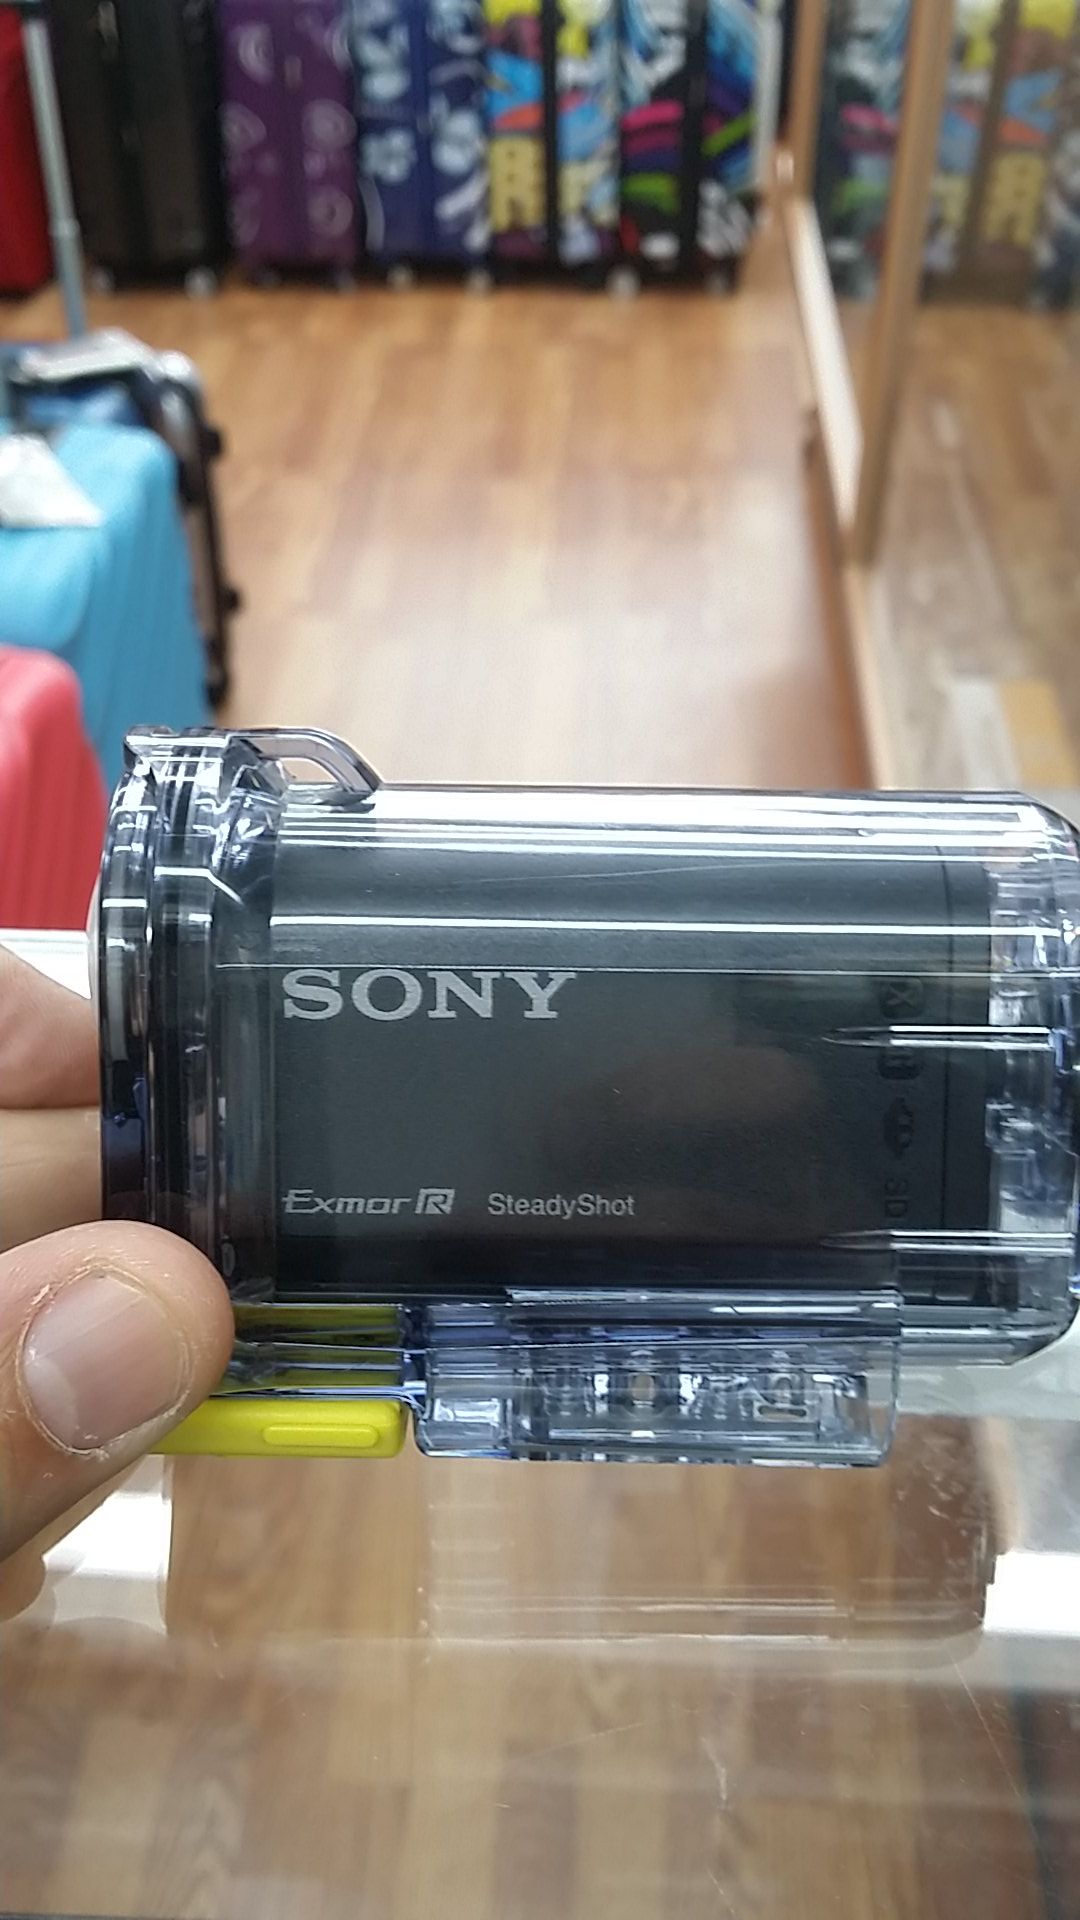 SONY UNDERWATER VIDEO-CAMERA FOR SALE!!!